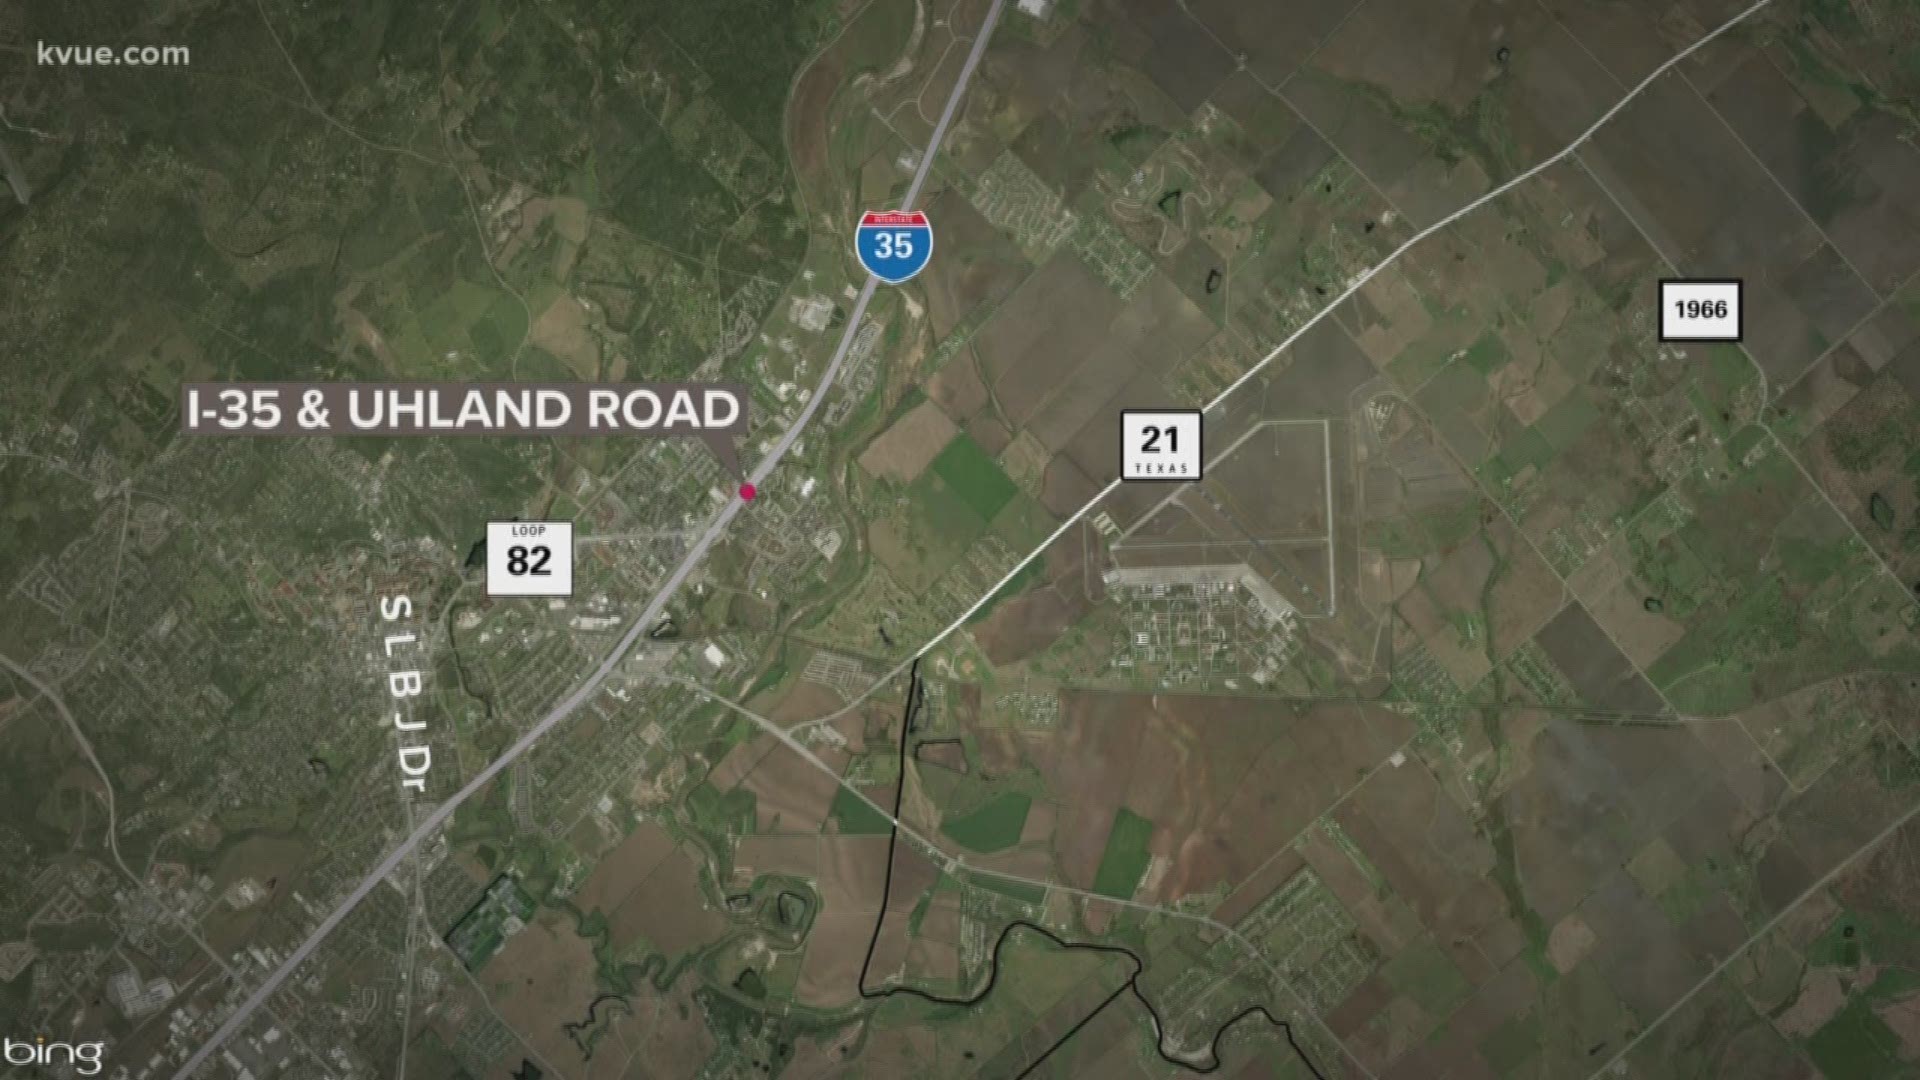 The incident happened near northbound I-35 just north of Uhland Road around 6 a.m. Monday in San Marcos.